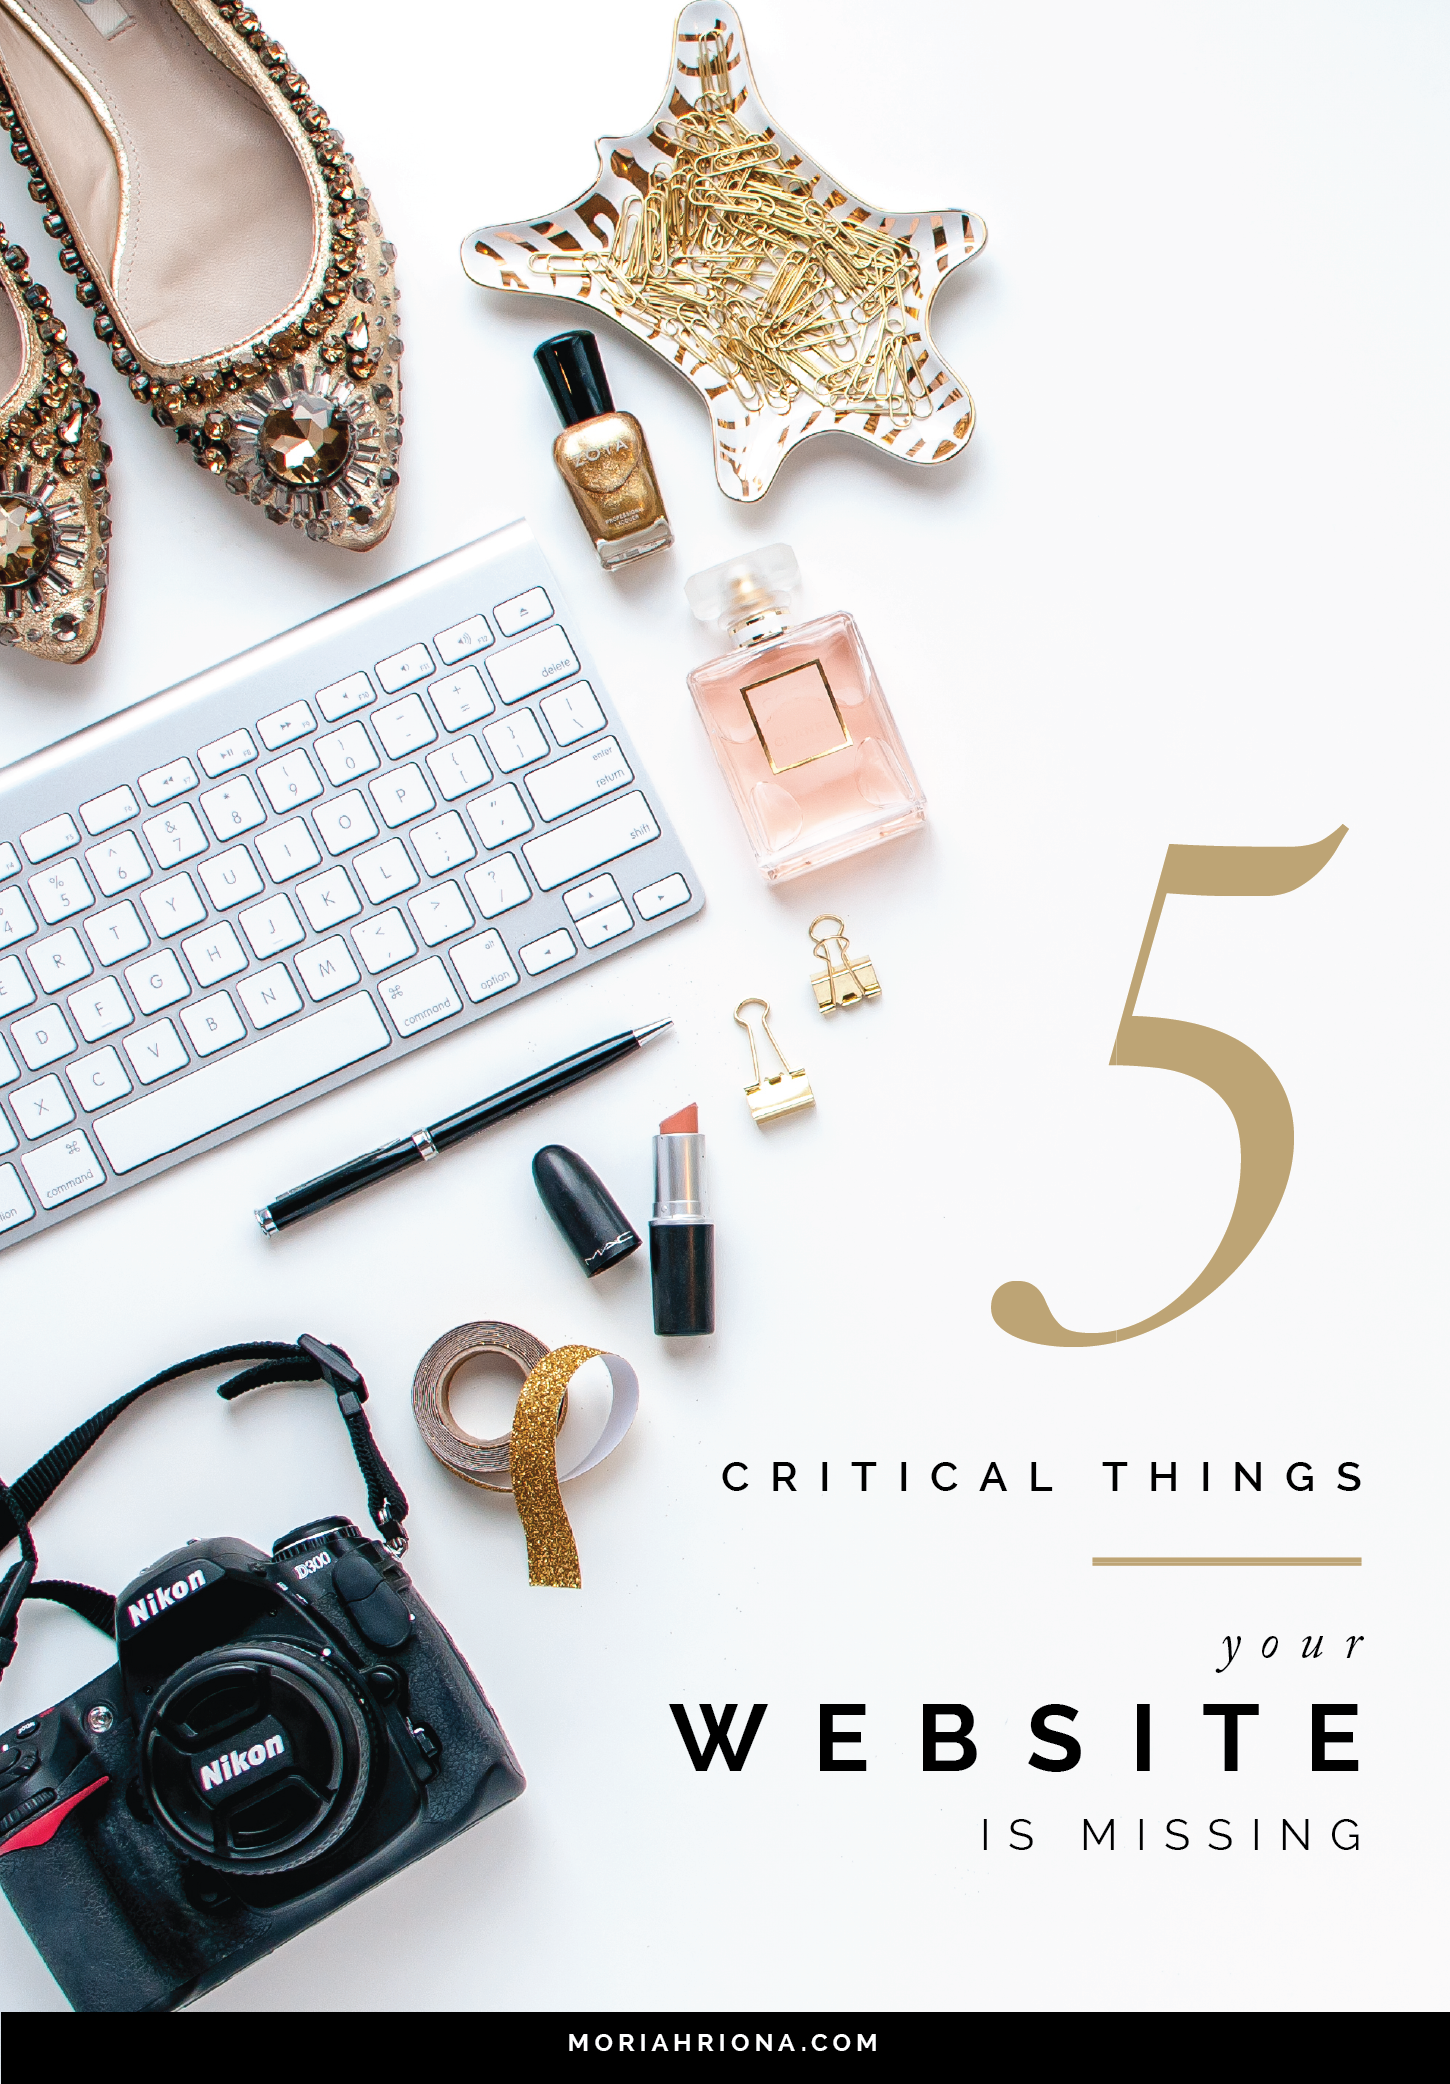 How to convert website visitors into leads. 5 Things your website is missing, and how to fix it. 5 Critical Things Your Website Is Missing. Website and branding tips and education for photographers and creative female entrepreneurs. #website #webdesign #photographywebsite #branding #biztips #smallbiz #womeninbiz